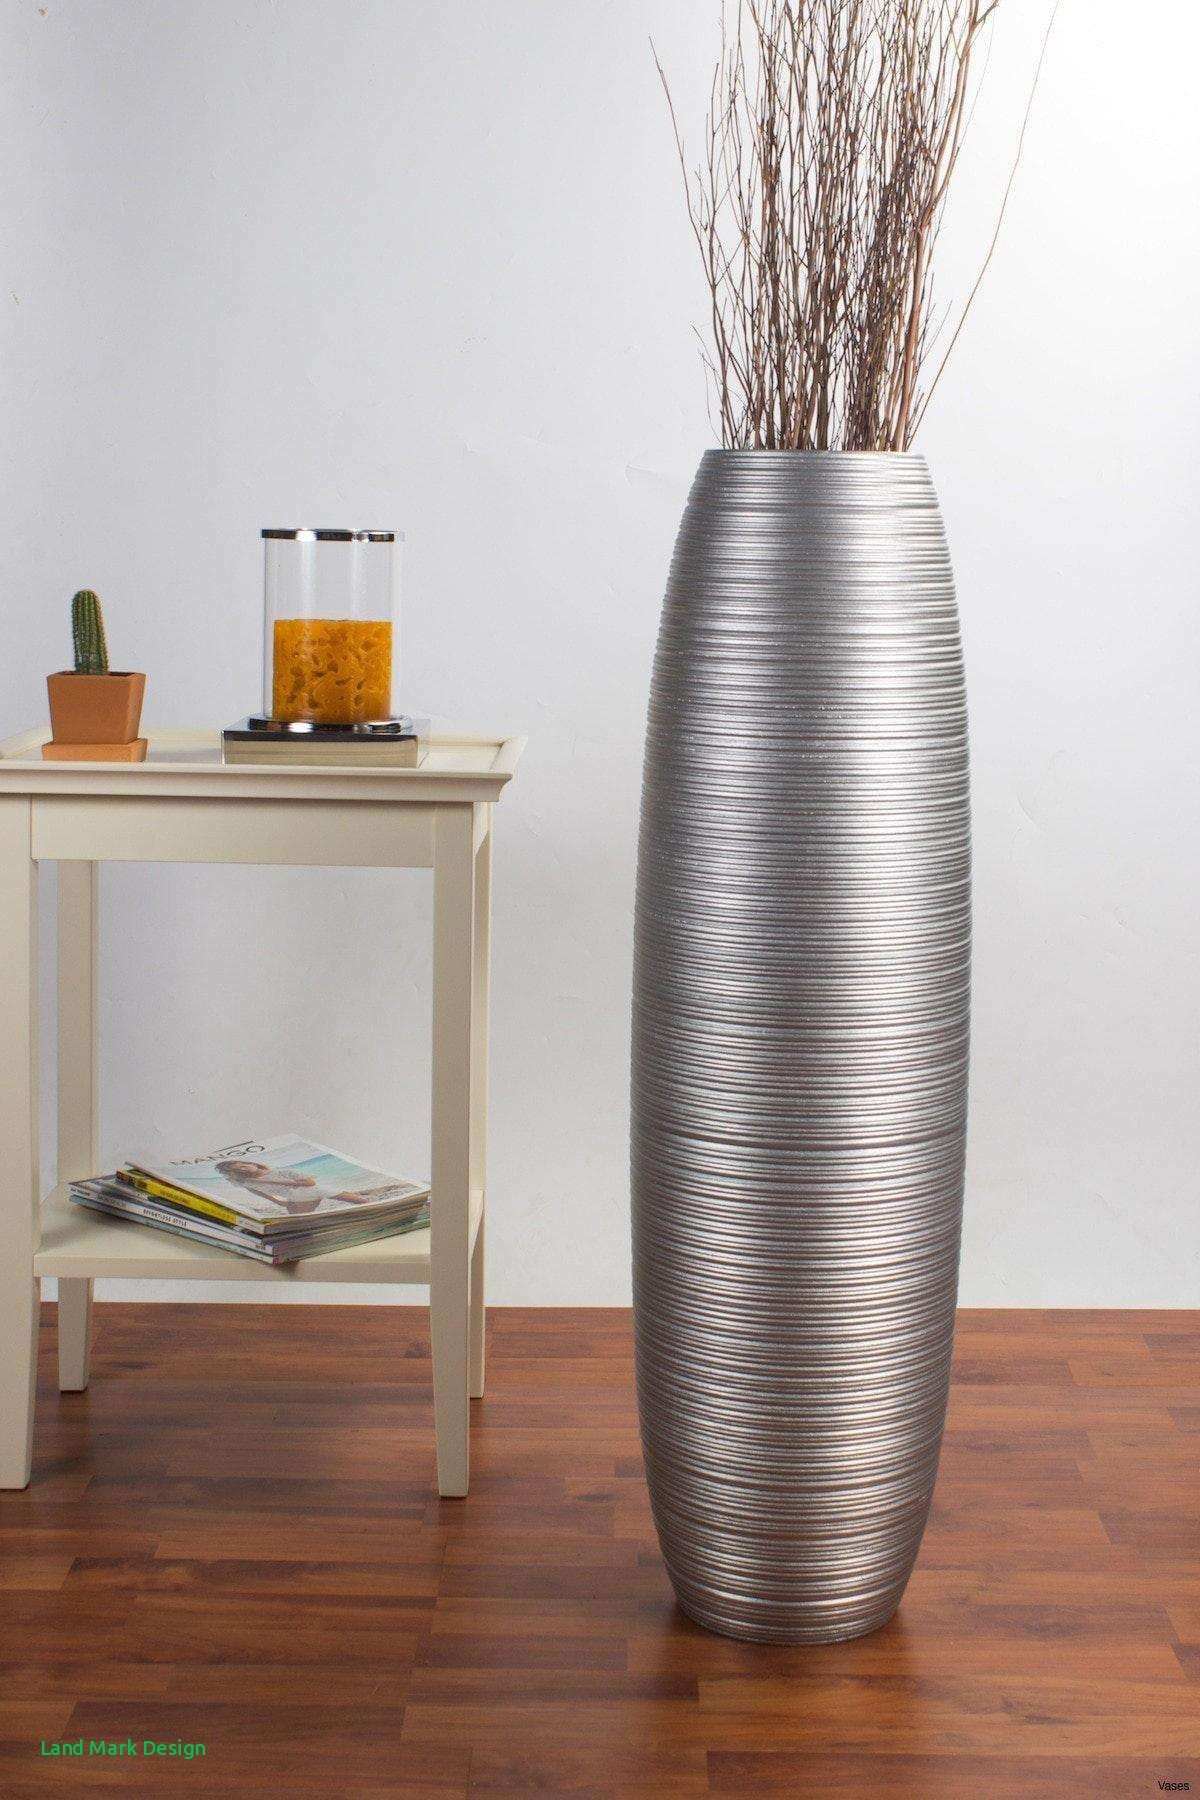 25 Stunning Z Gallerie Vases 2024 free download z gallerie vases of image of large metal floor vases vases artificial plants collection within large metal floor vases image silver floor vase design of image of large metal floor vases